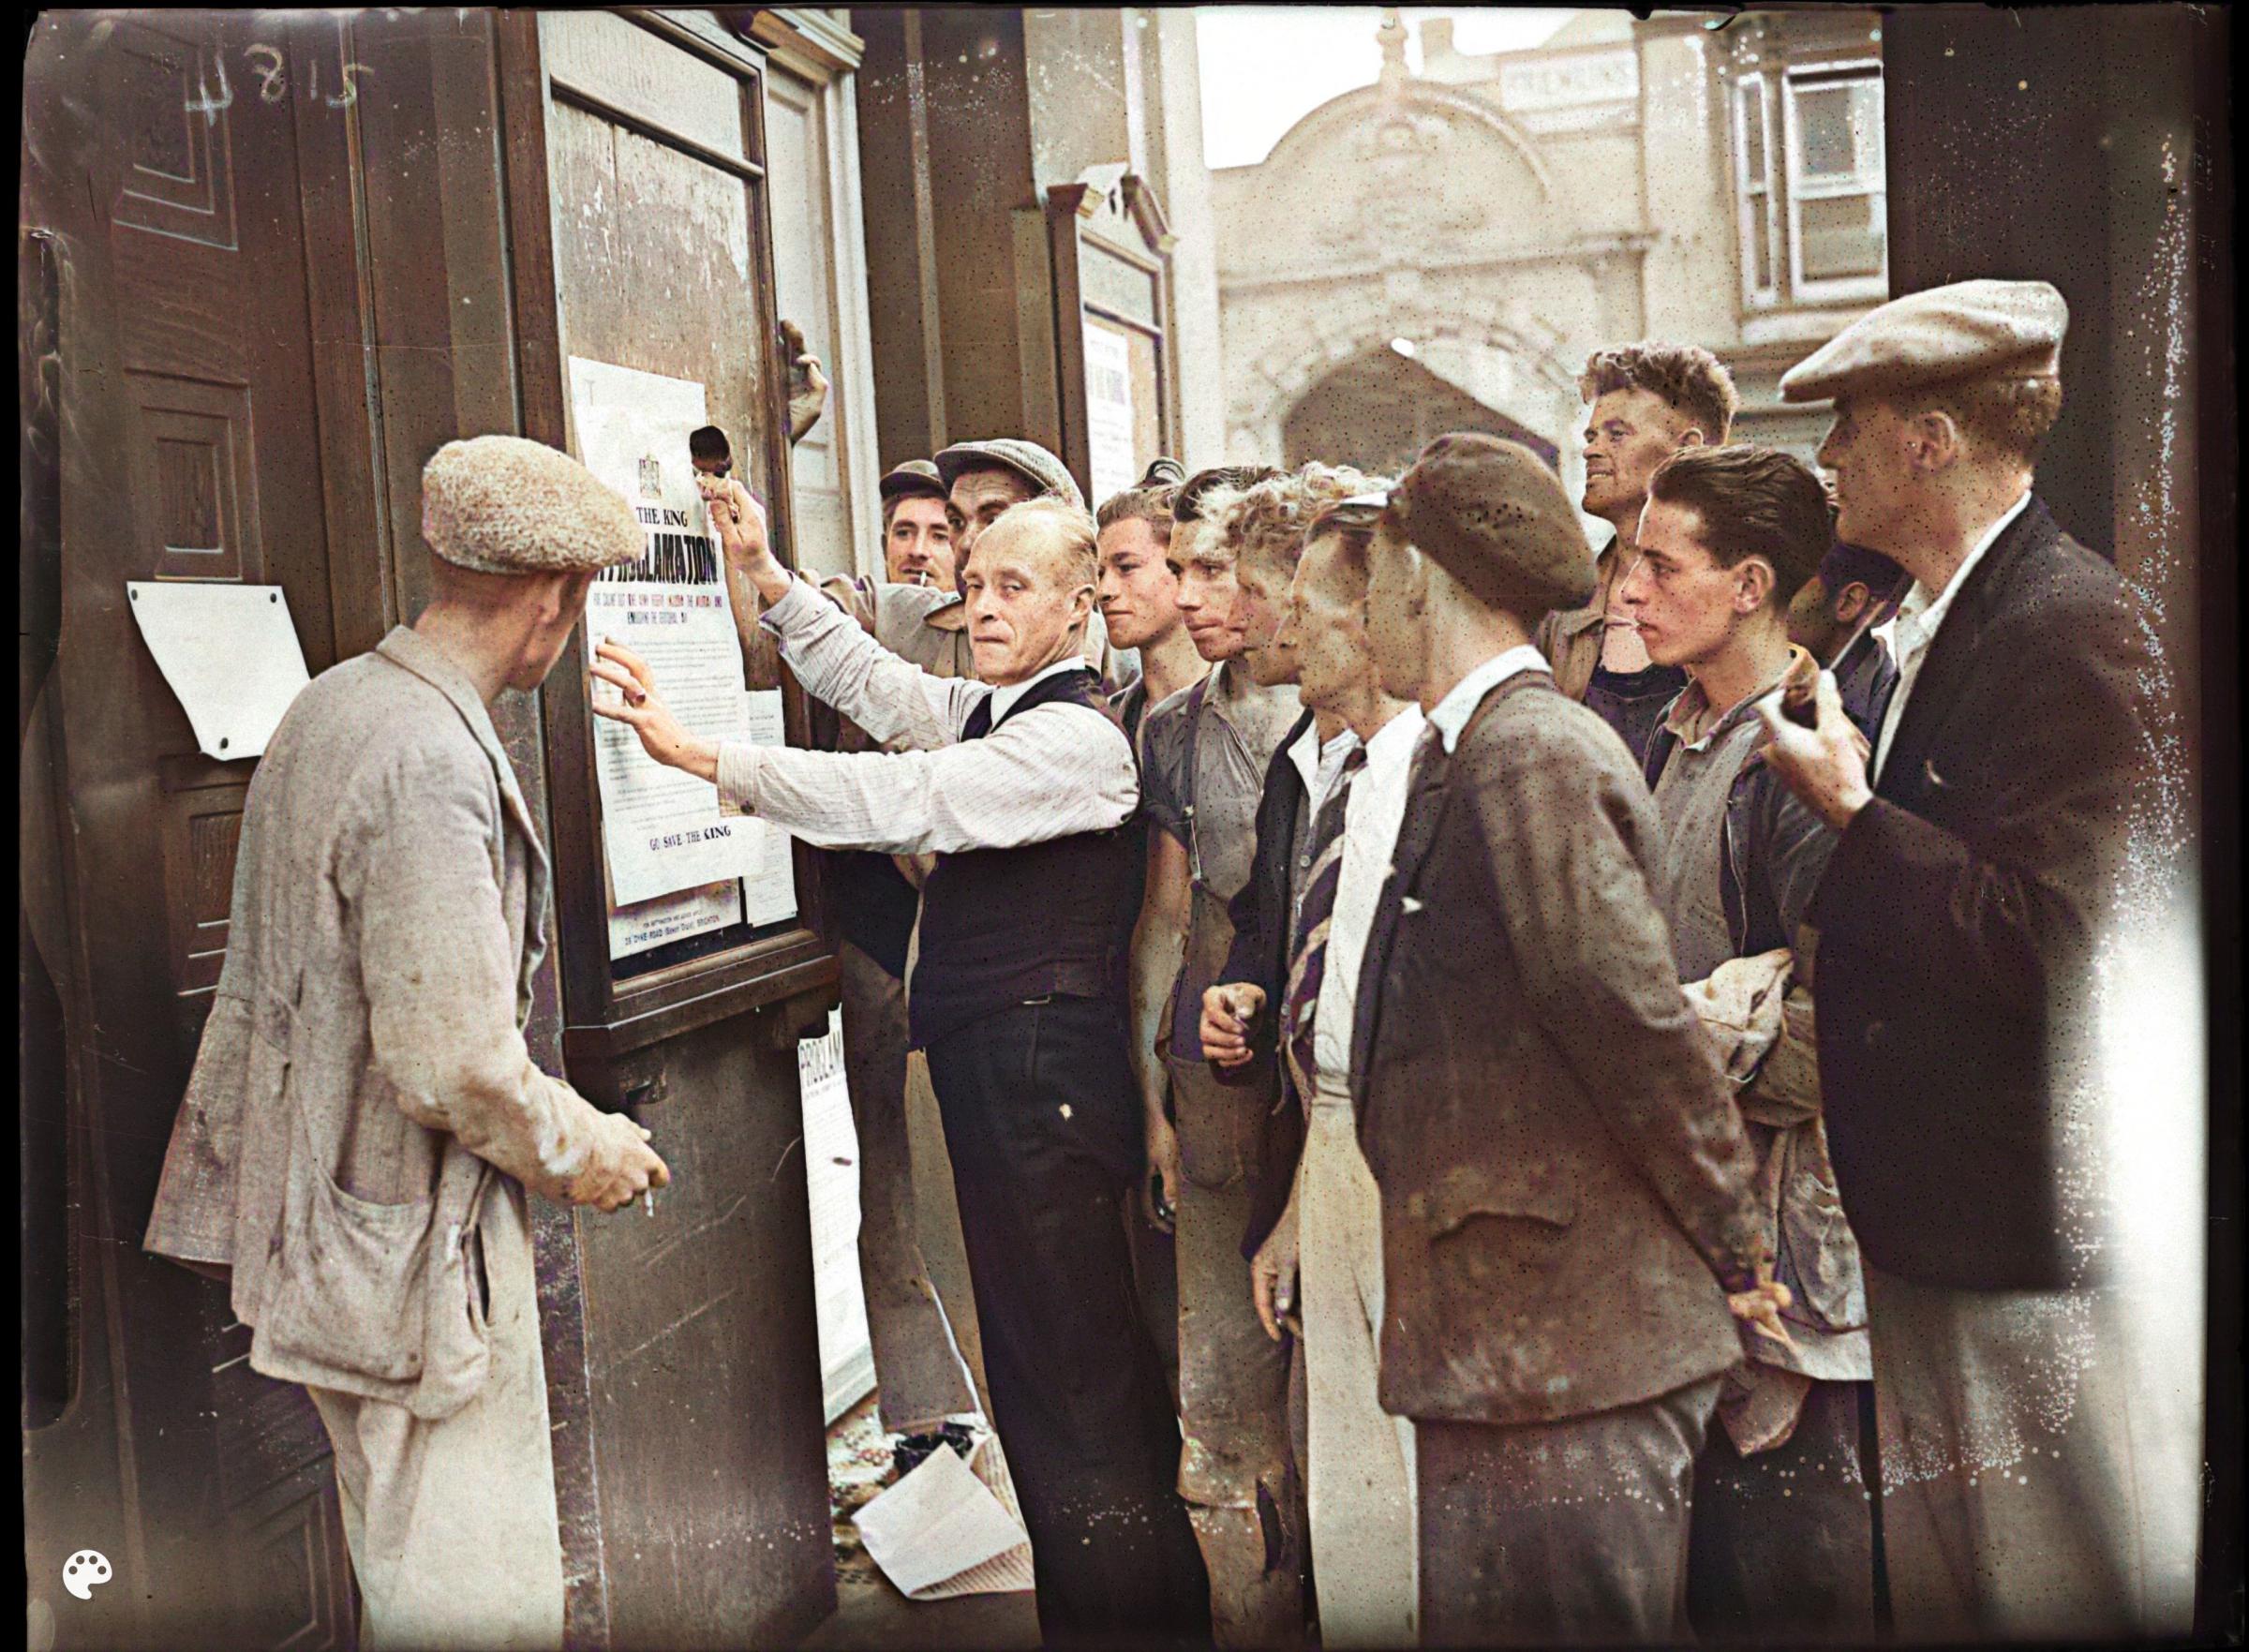 The proclamation of the accession of Edward VIII in January 1936. The notices pasted on the window is headed ‘God Save The King’ 